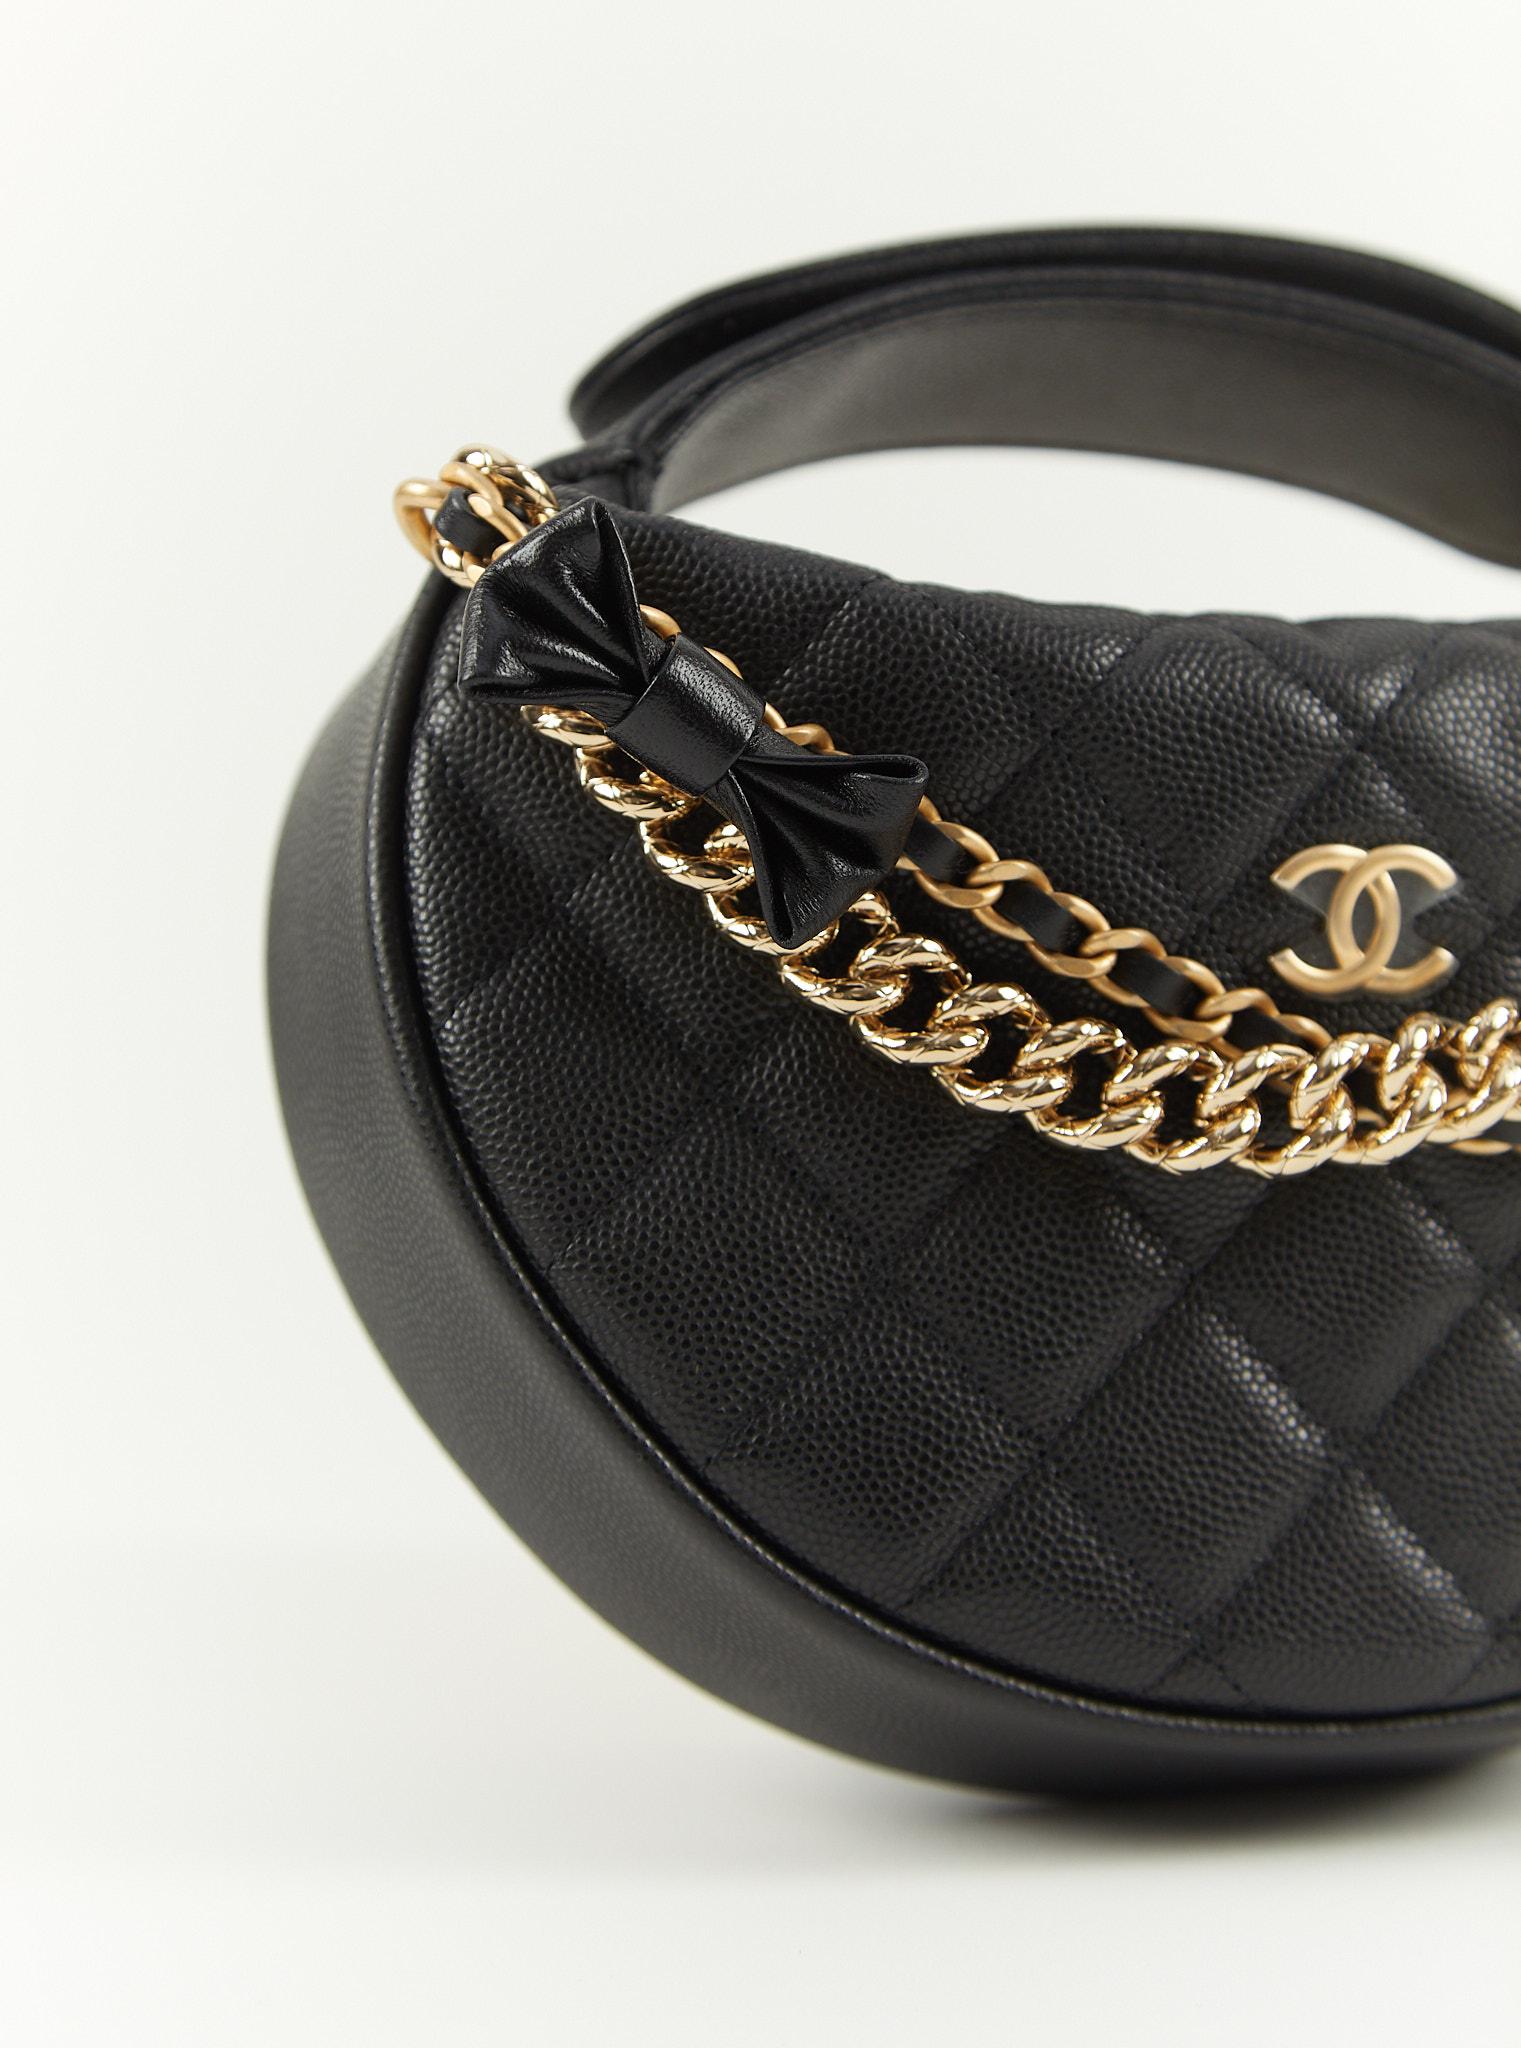 CHANEL MINI LOOP CHANGE PURSE WITH CHAINS BLACK Caviar Leather with Gold-Tone Ha In Excellent Condition For Sale In London, GB